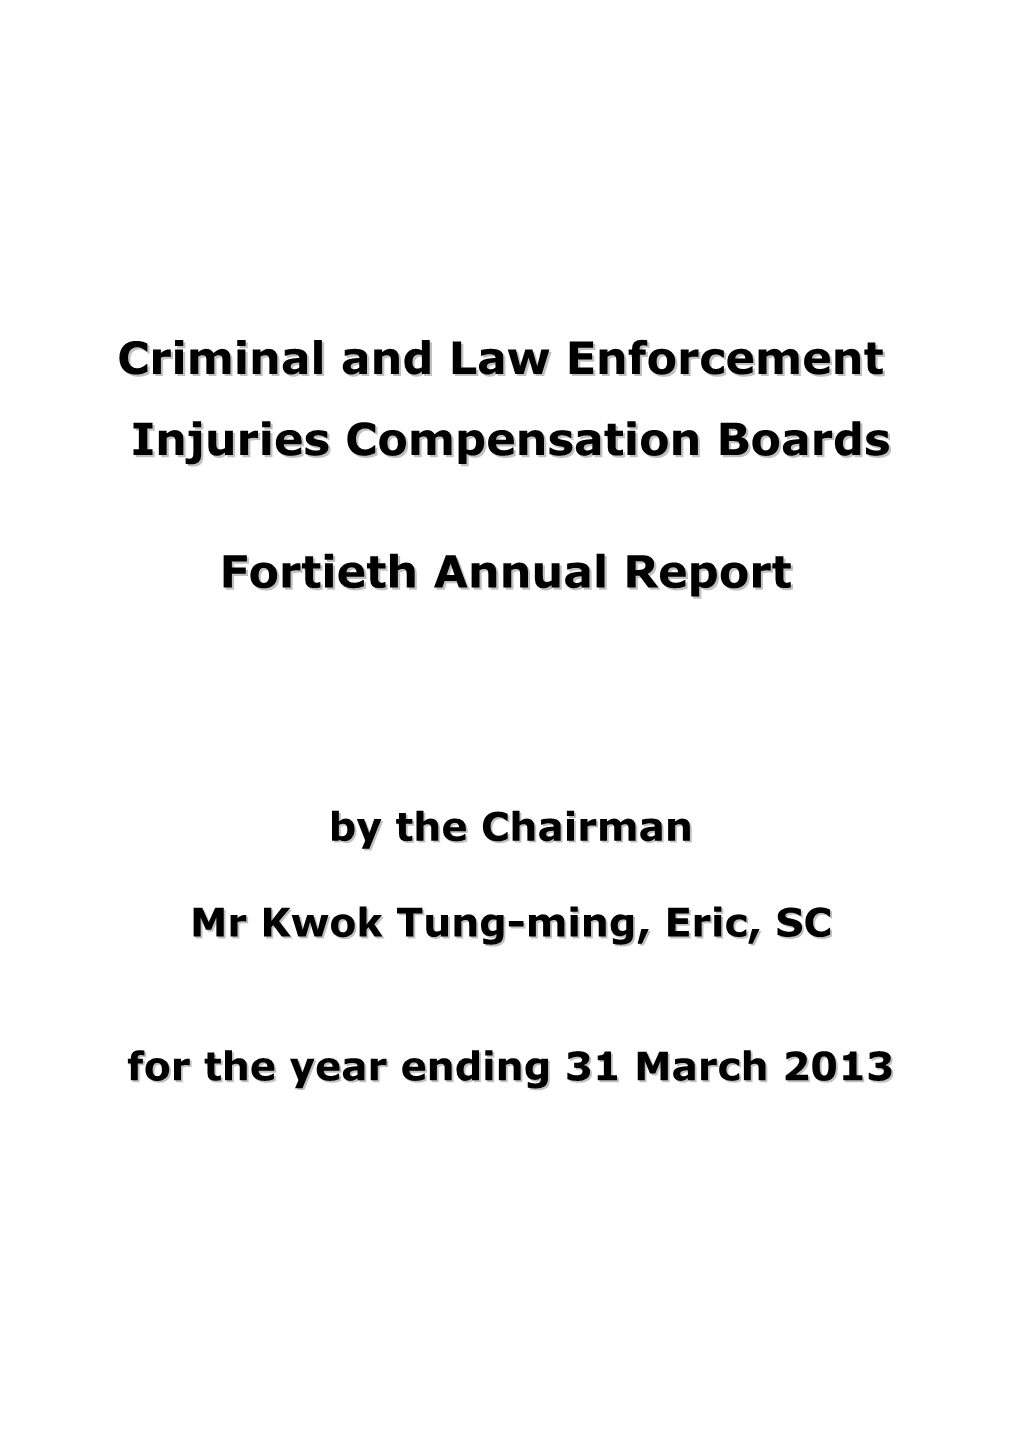 Criminal and Law Enforcement Injuries Compensation Boards